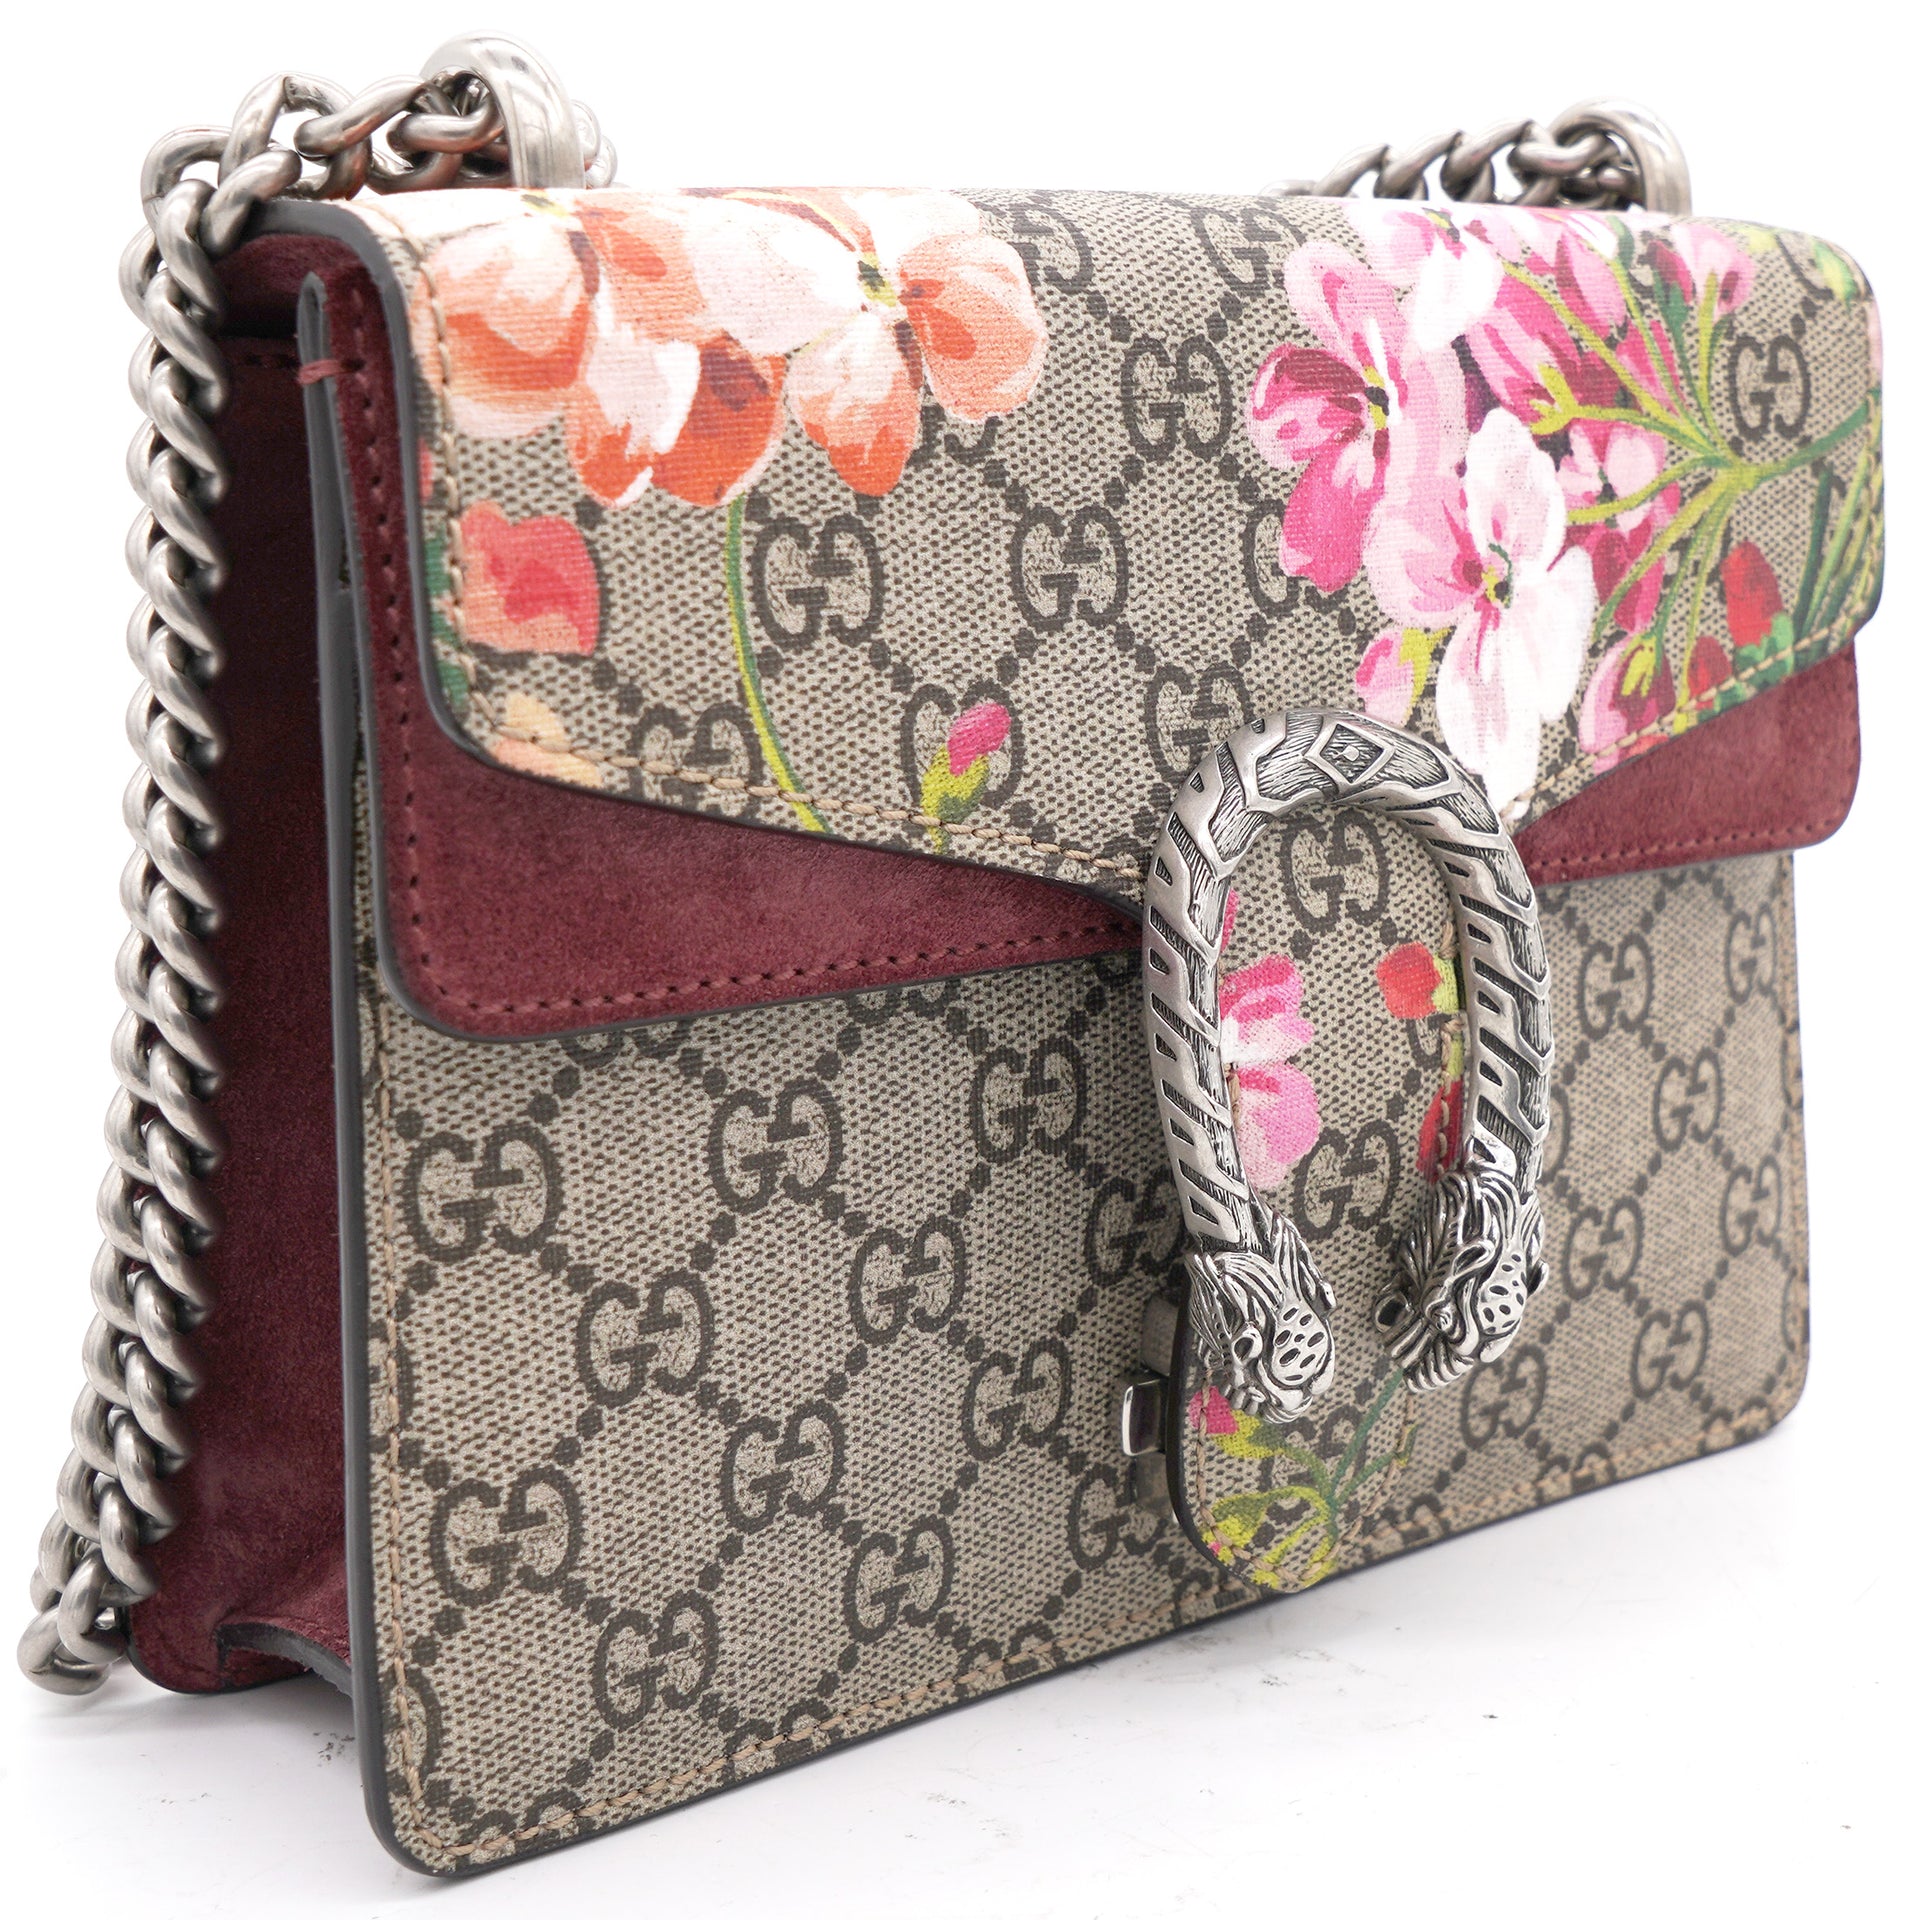 Gucci Dionysus Chain Wallet GG Supreme Blooms Mini Antique Rose - US